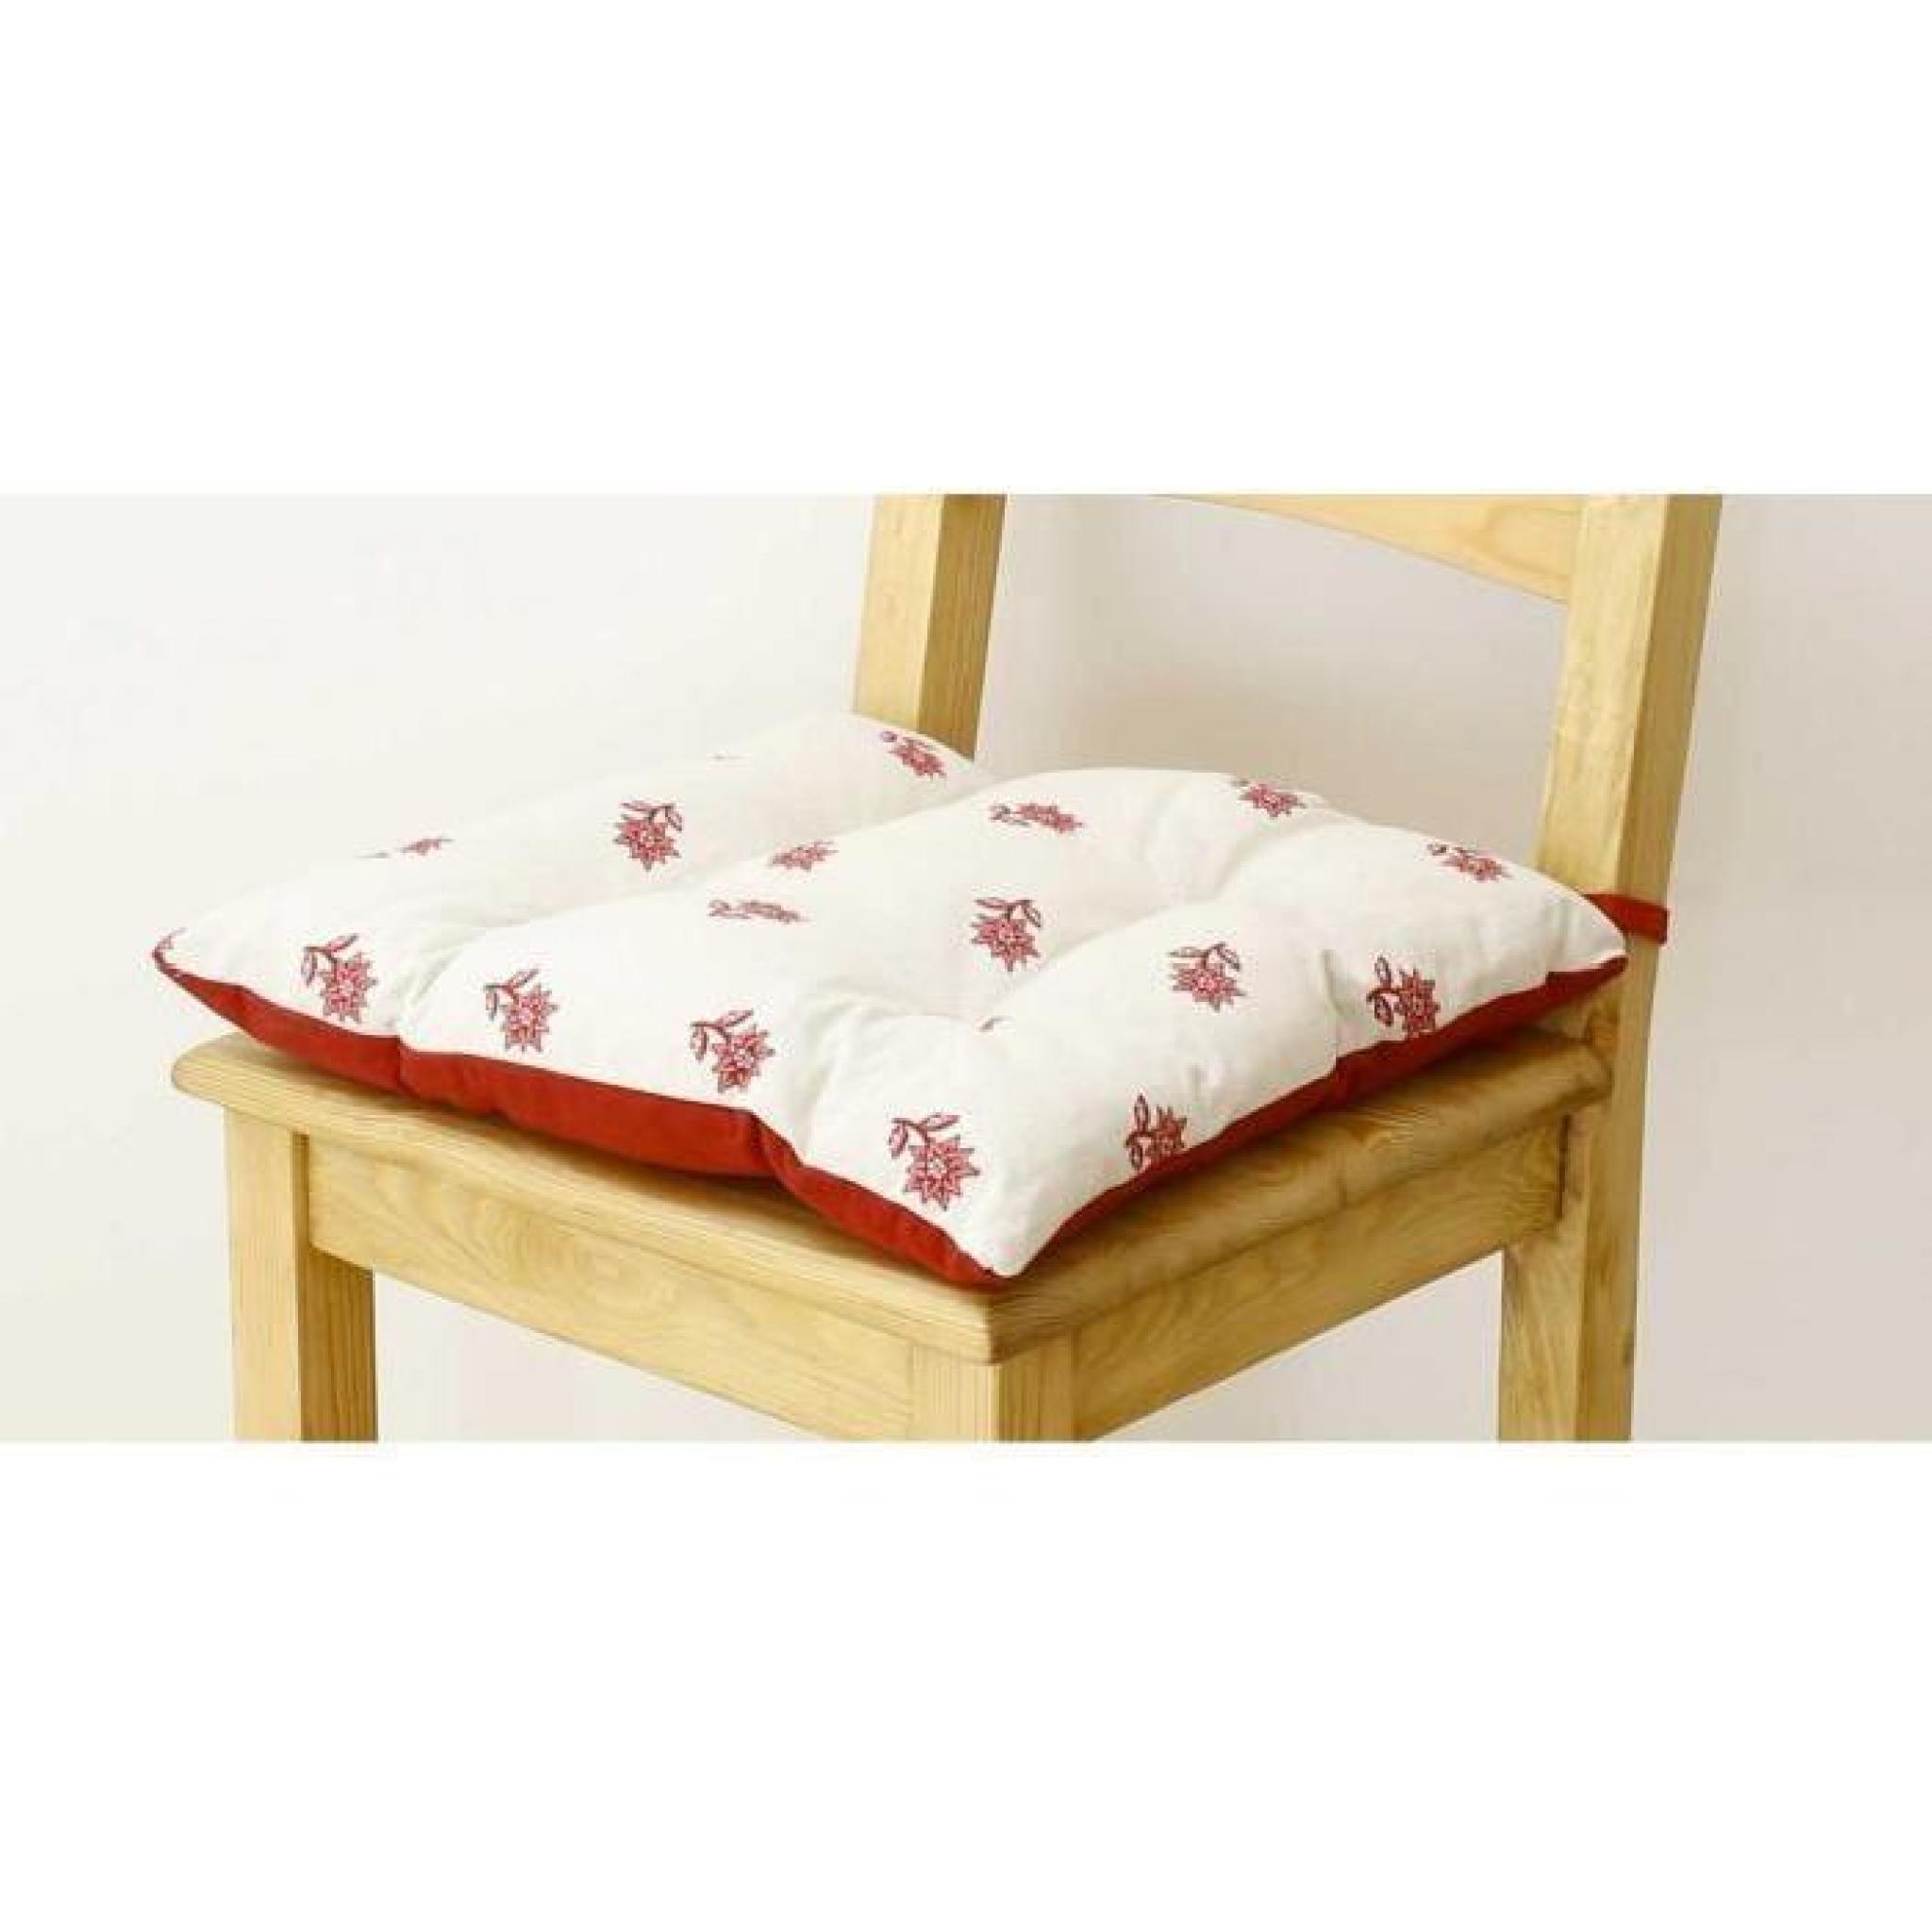 Galette de chaise style montagne Edelweiss blanc rouge Aspin pas cher